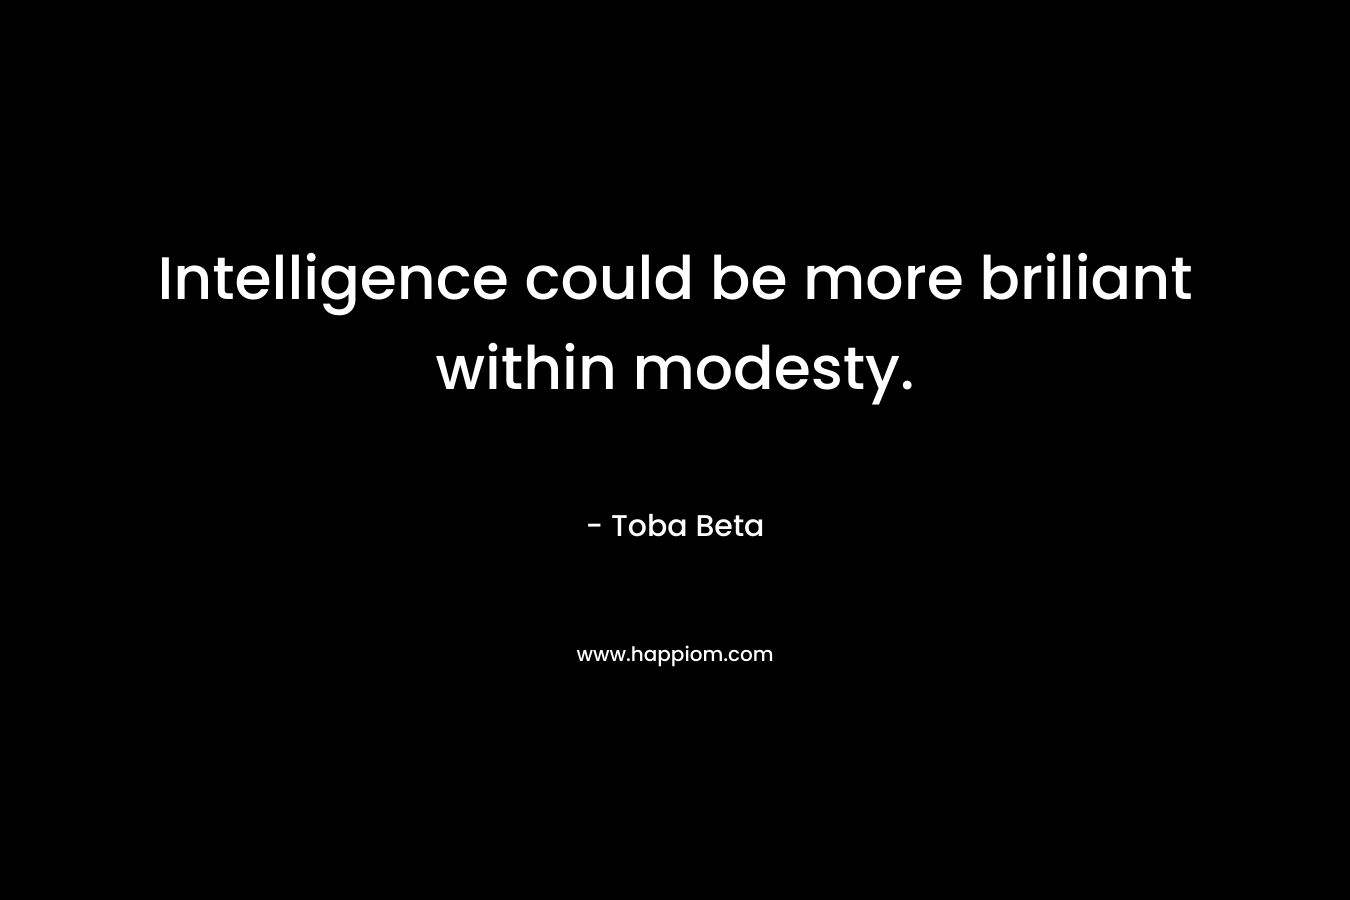 Intelligence could be more briliant within modesty.